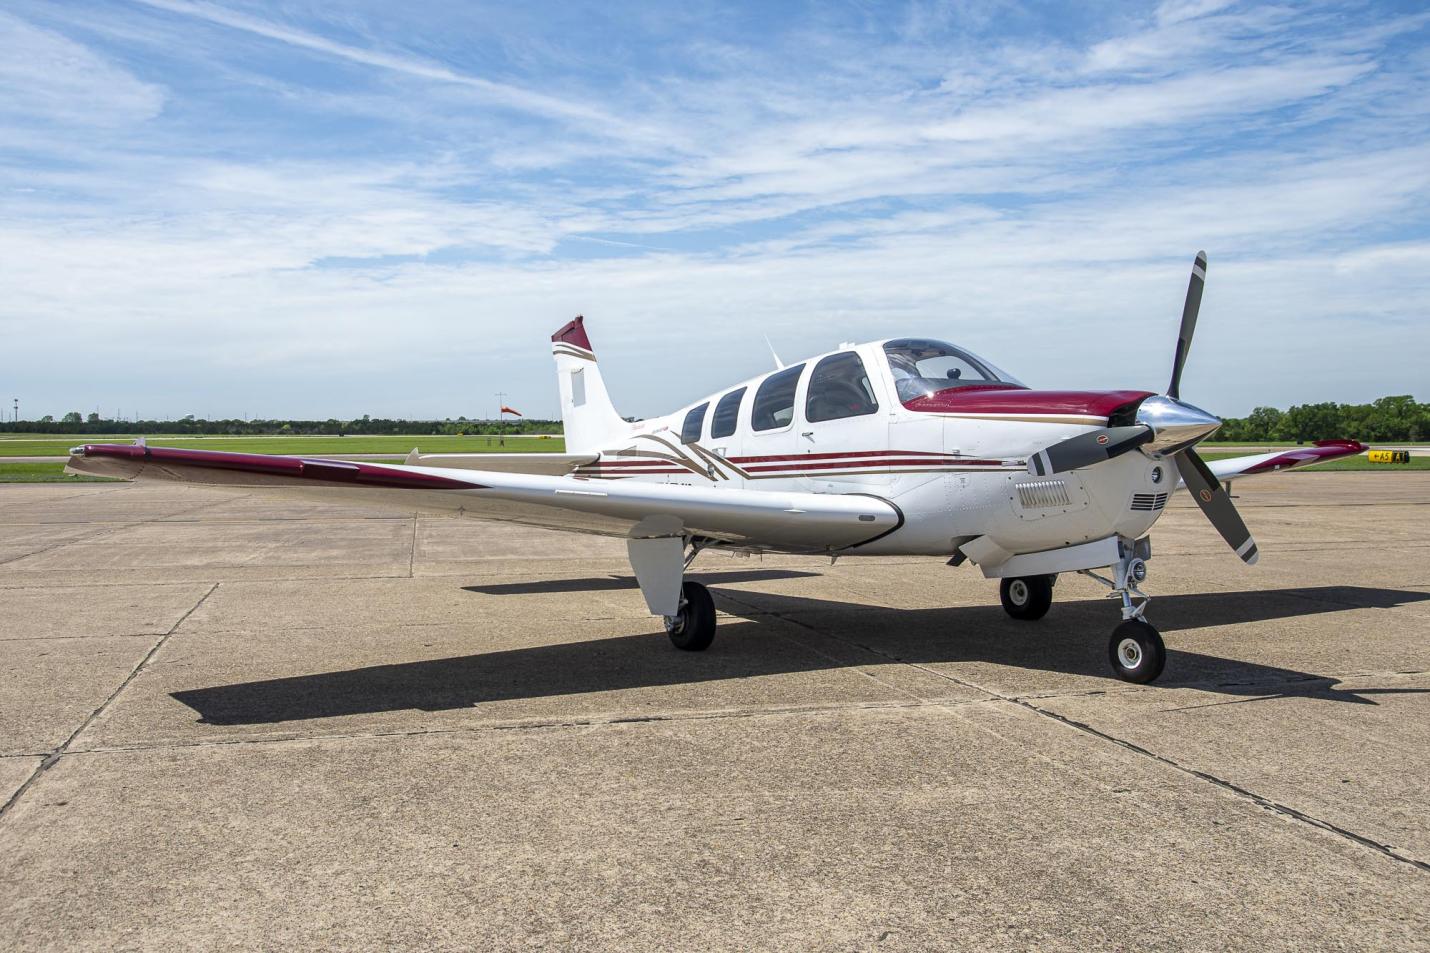 What Are the Safety Features of Beechcraft Aircraft?